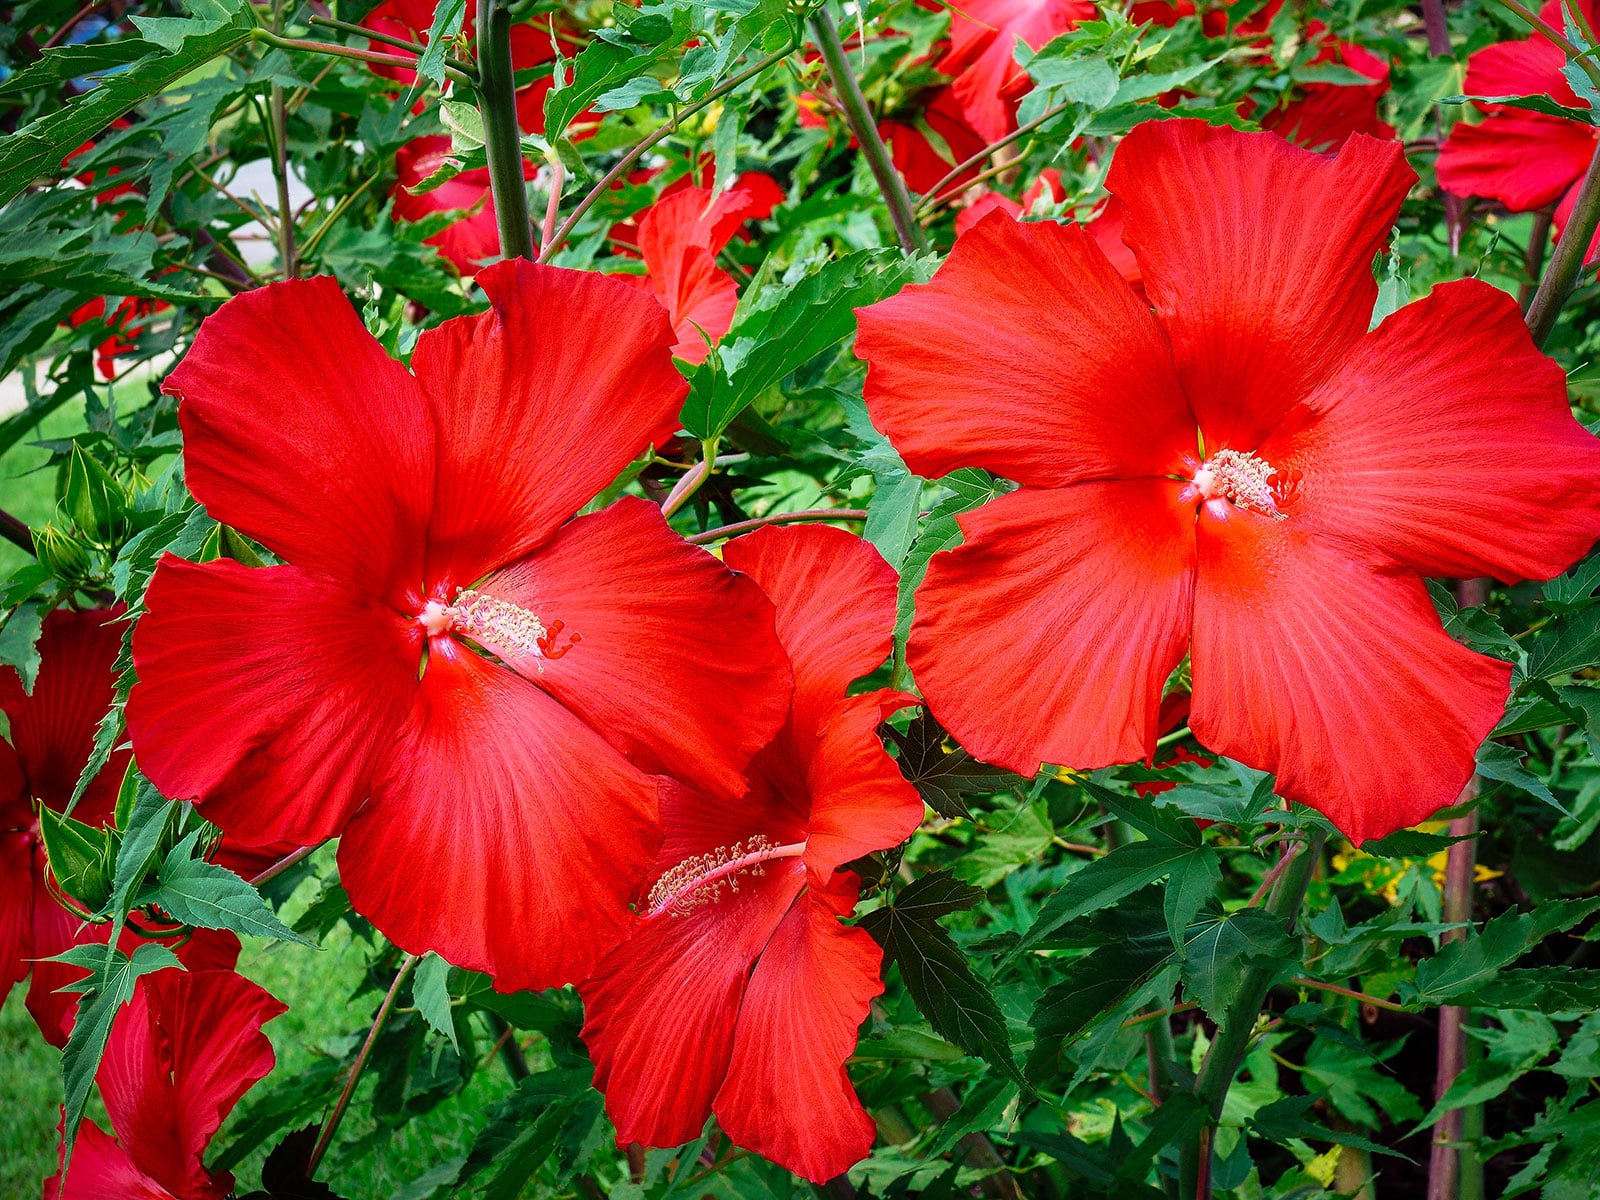 A perennial hardy hibiscus plant in bloom with multiple large red flowers